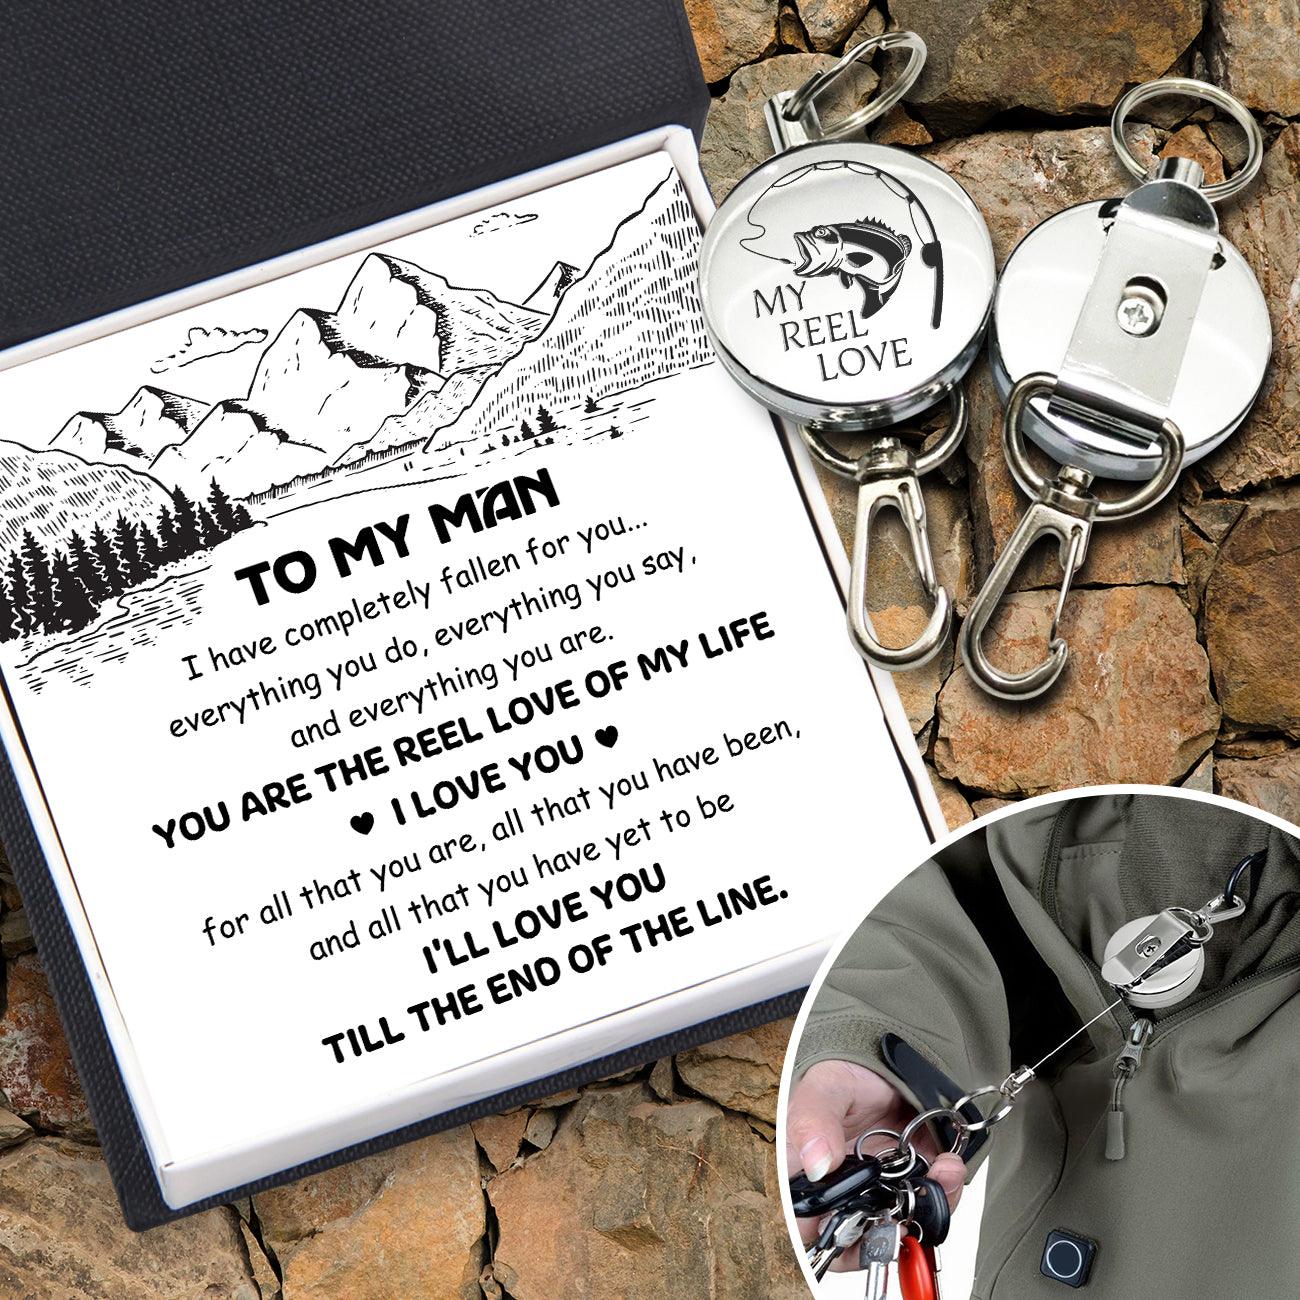 Retractable Pull Keychain - Fishing - To My Man - I Love You - Augkze26001 - Gifts Holder